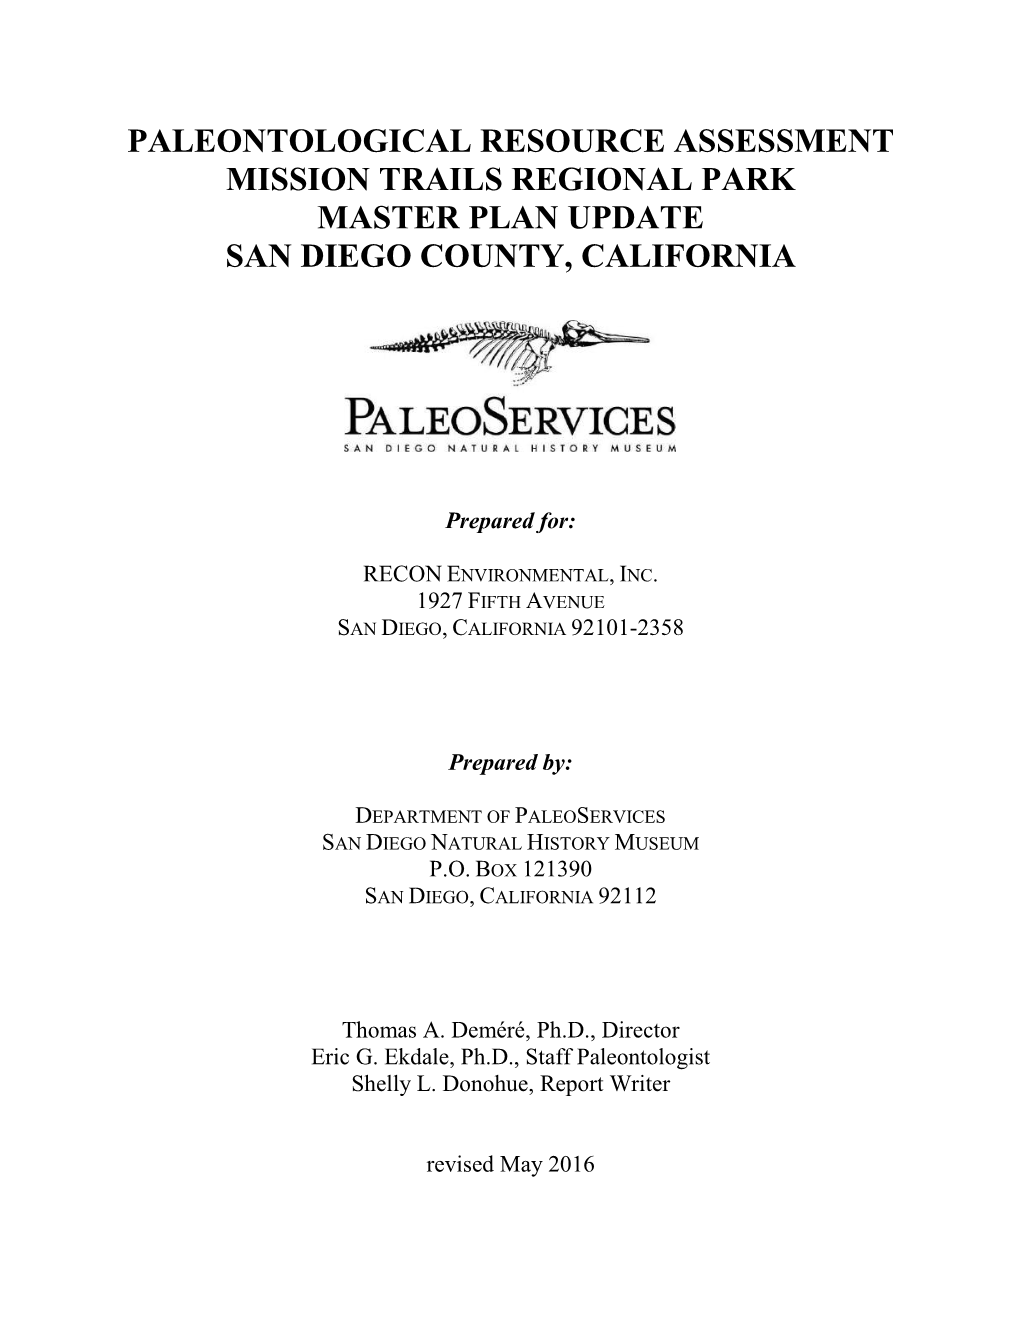 Paleontological Resource Assessment Mission Trails Regional Park Master Plan Update San Diego County, California